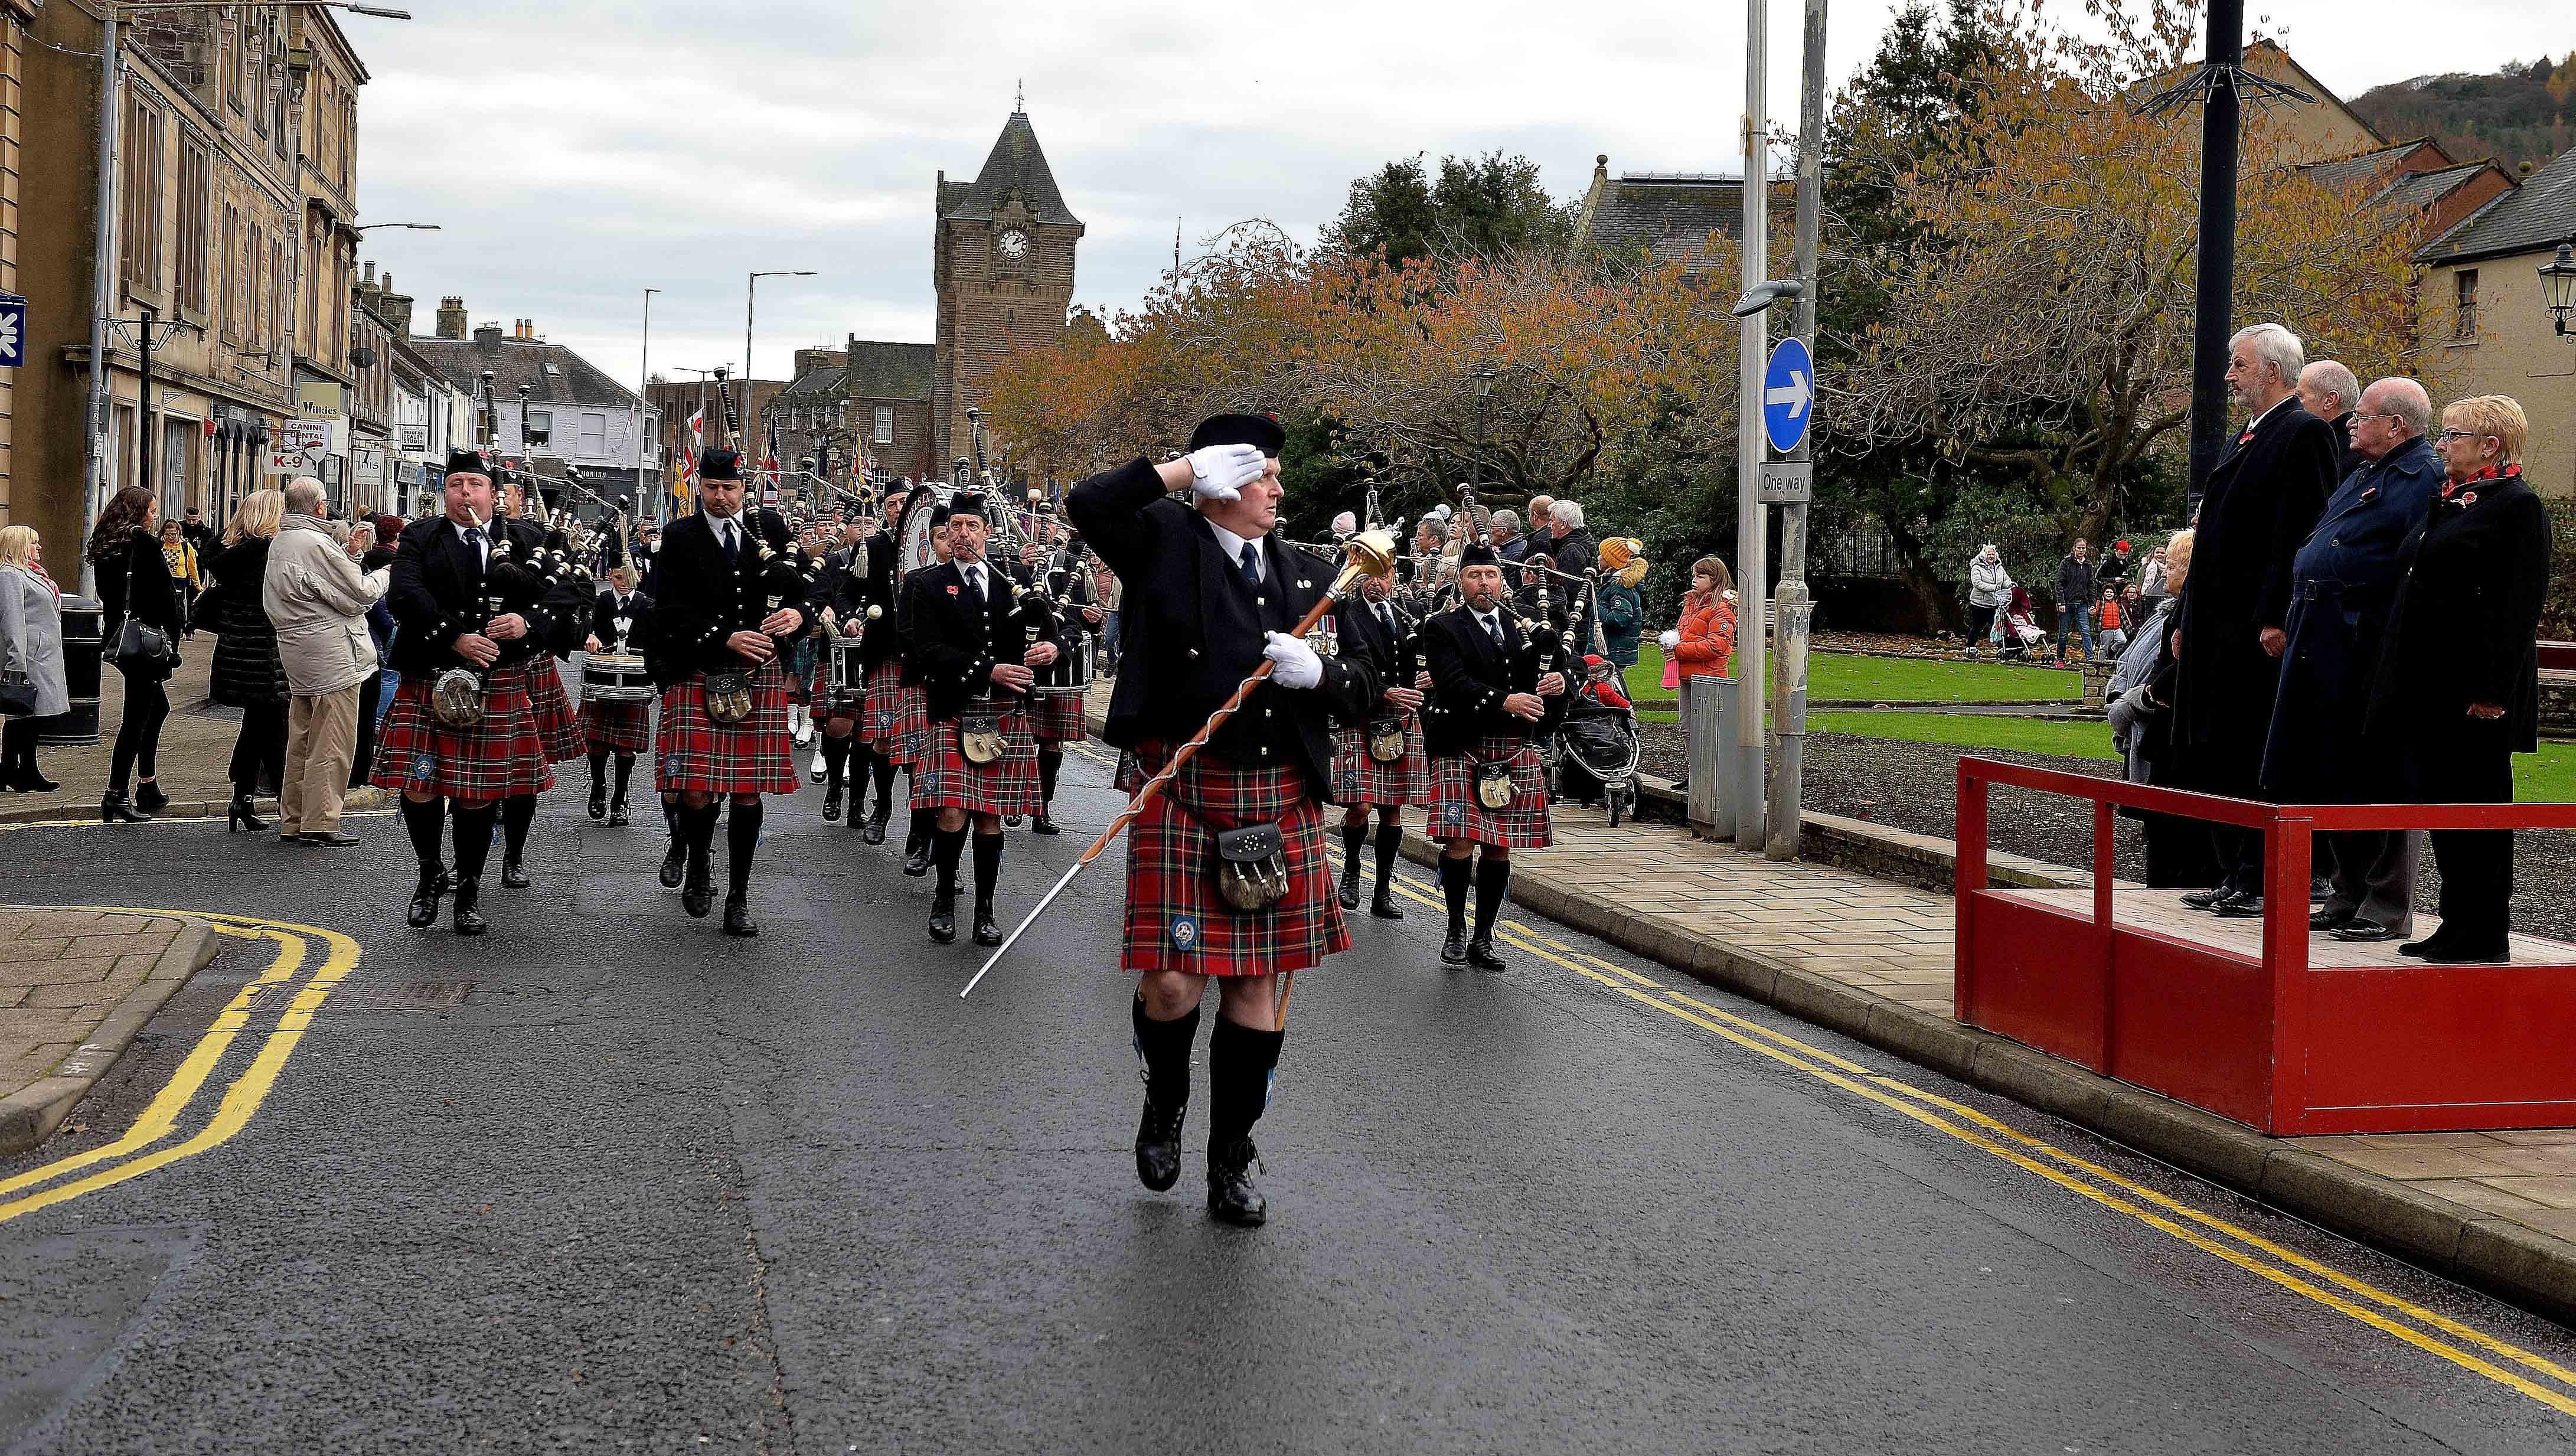 Deputy Lord Lieutenant Mike Gray takes the salute from drum major Iain Brown in Galashiels.